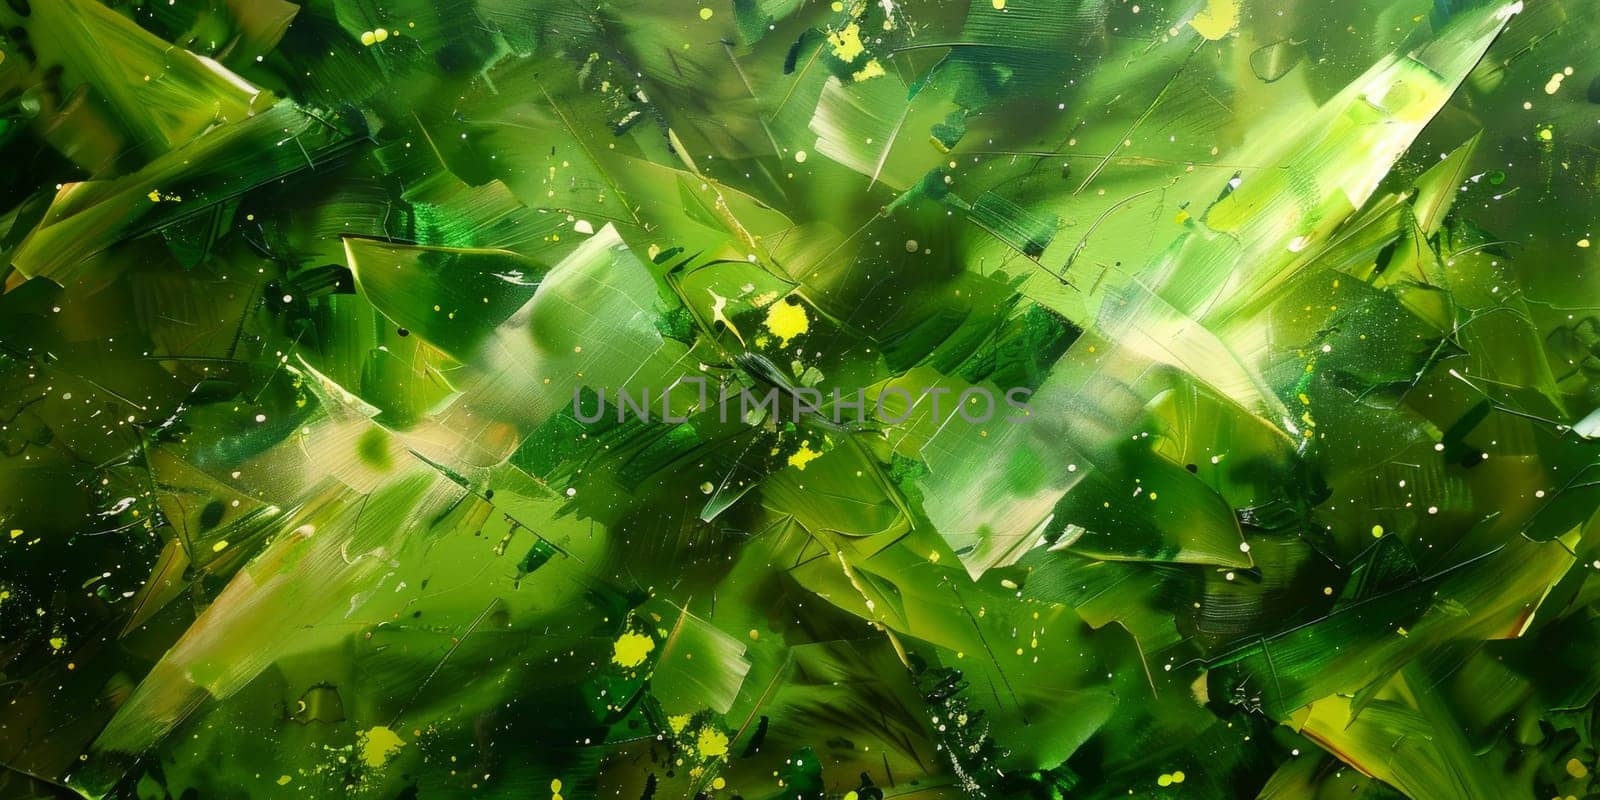 Green leaves in abstract pattern creating a lush green background by Kadula